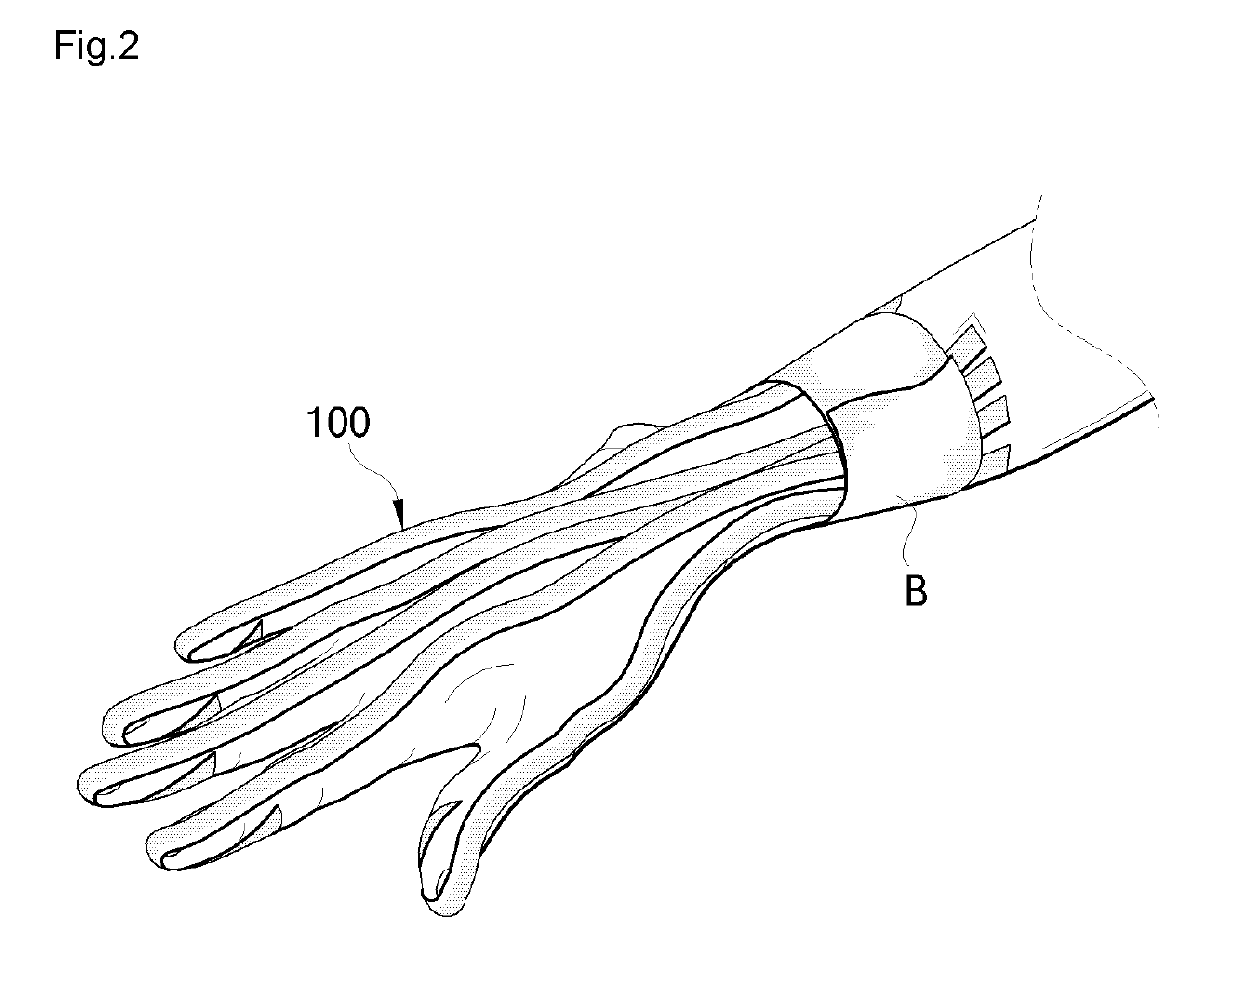 Elastic band for correcting joint deformity and enhancing joint function, and device for mounting same